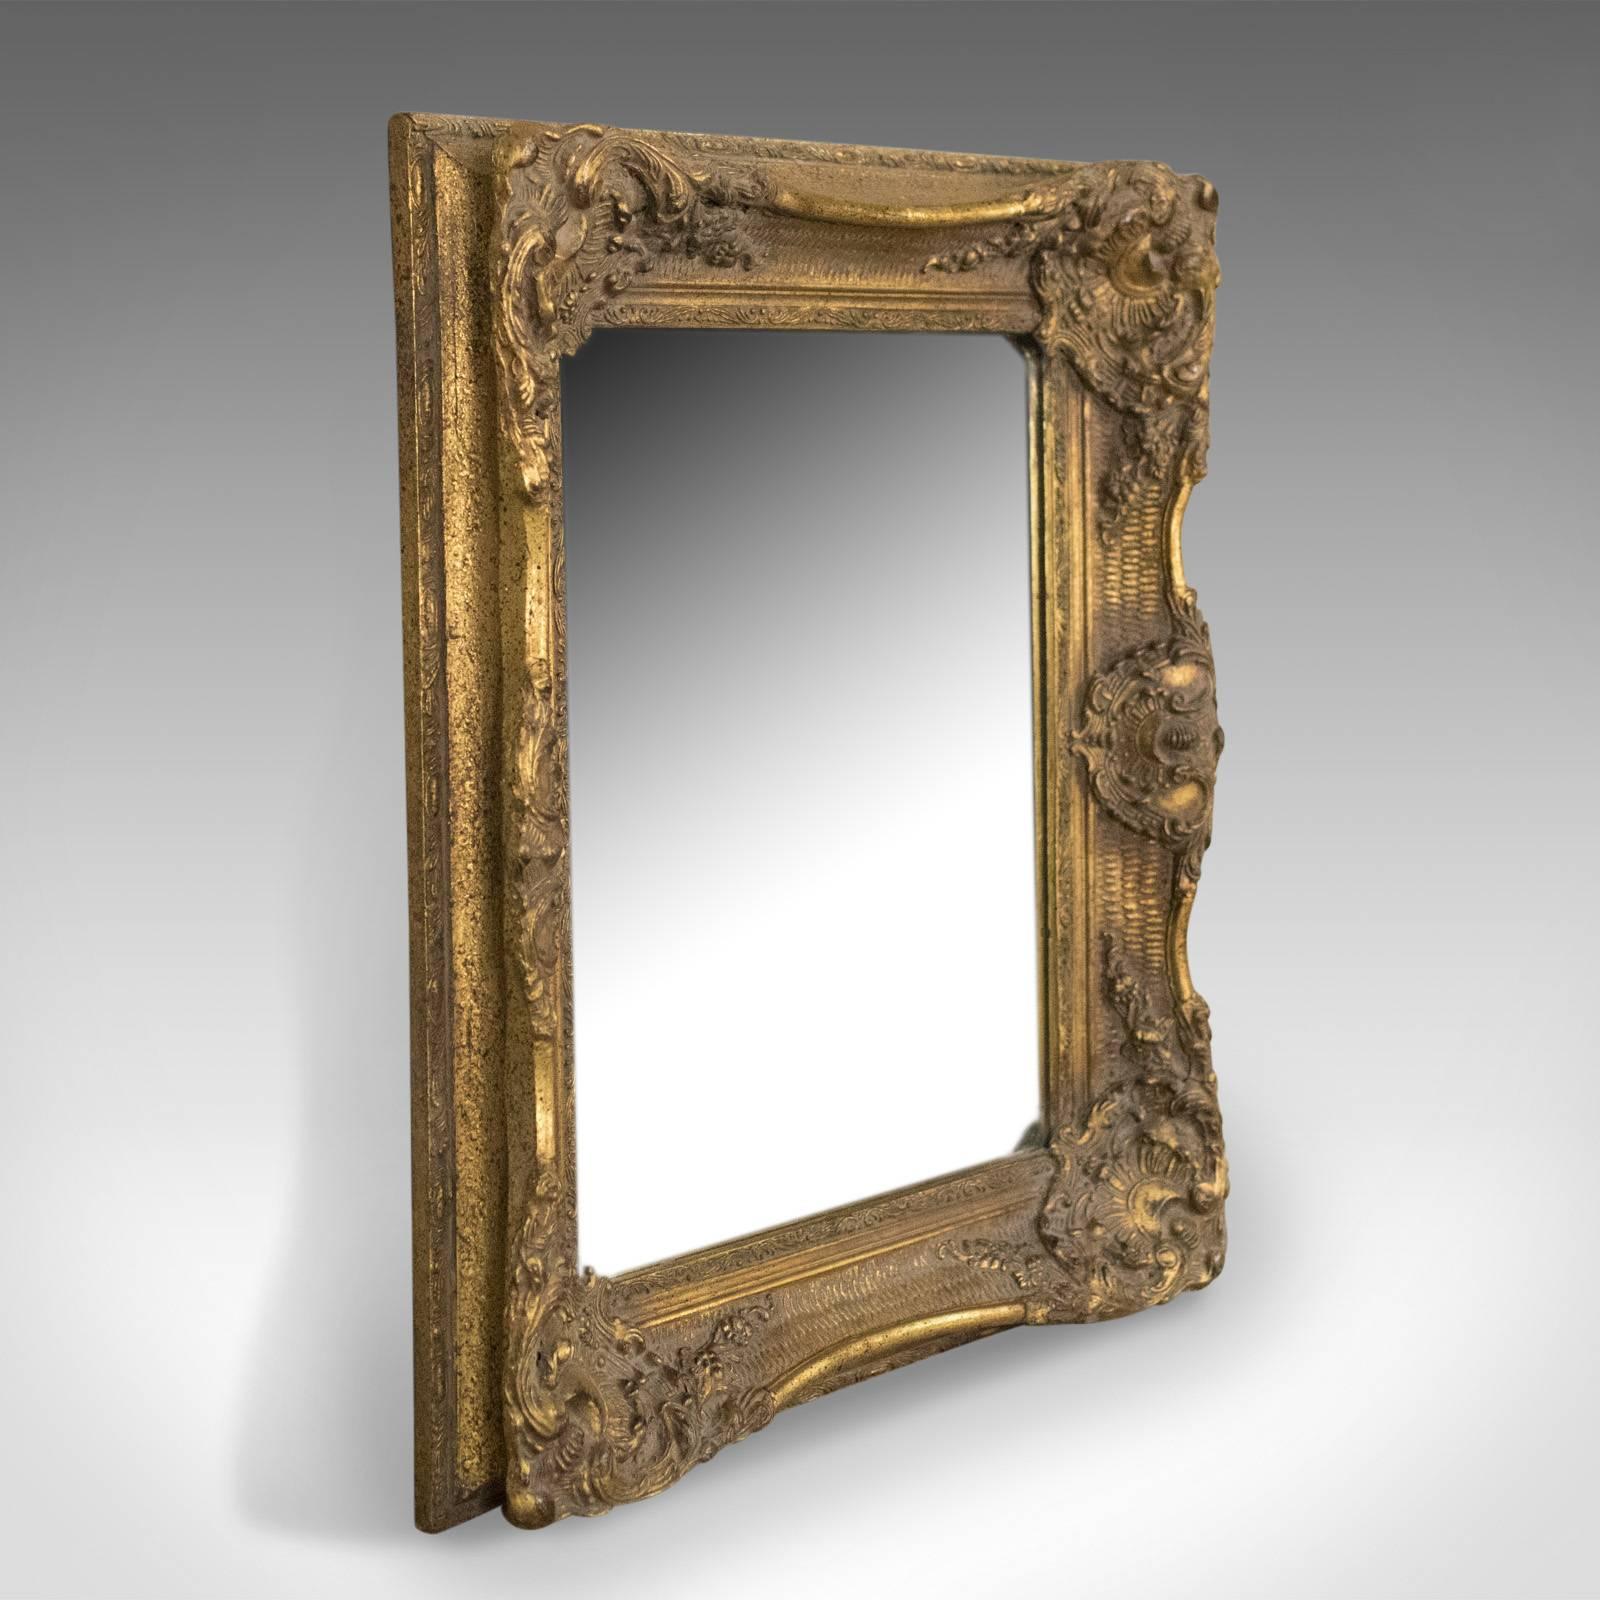 This is a wall mirror in the Victorian classical revival taste in giltwood and dating to the latter half of the 20th century.

An attractive revival piece in a gilt gesso frame
Late 20th century in the Victorian classical taste
Decorated with